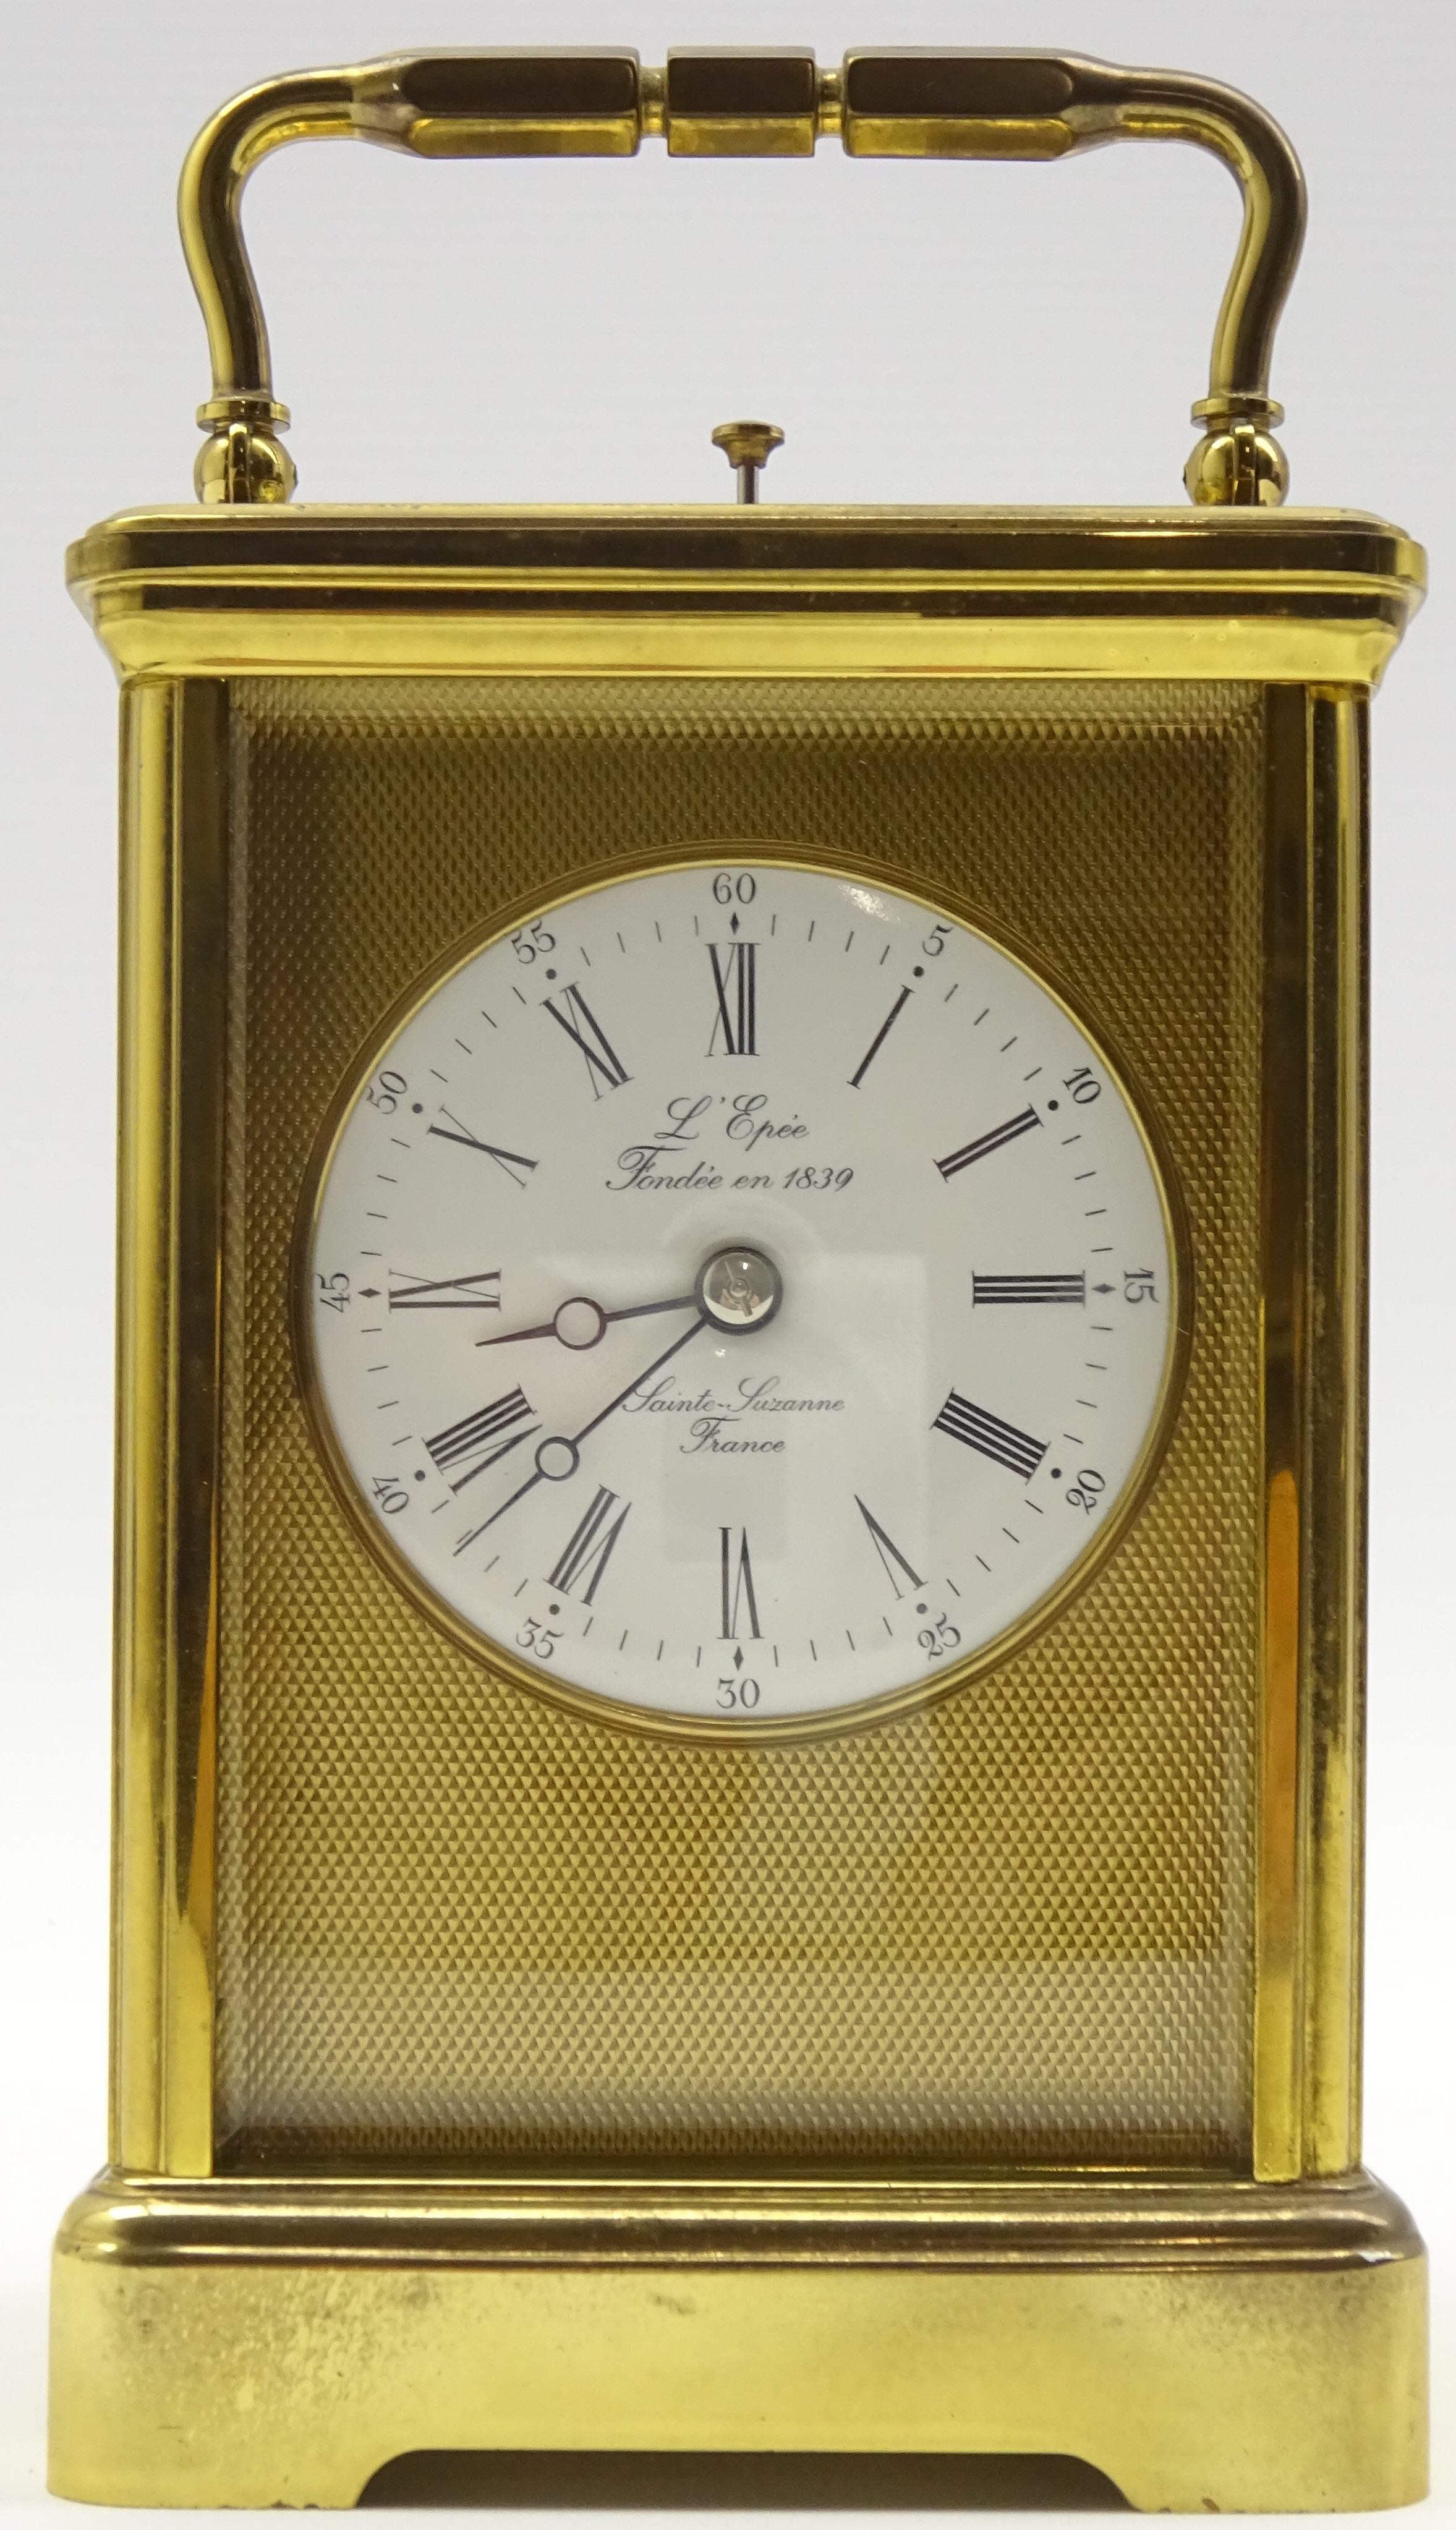 20th Century repeater carriage clock, the white enamel dial inscribed 'L'Epee Saint-Suzanne,